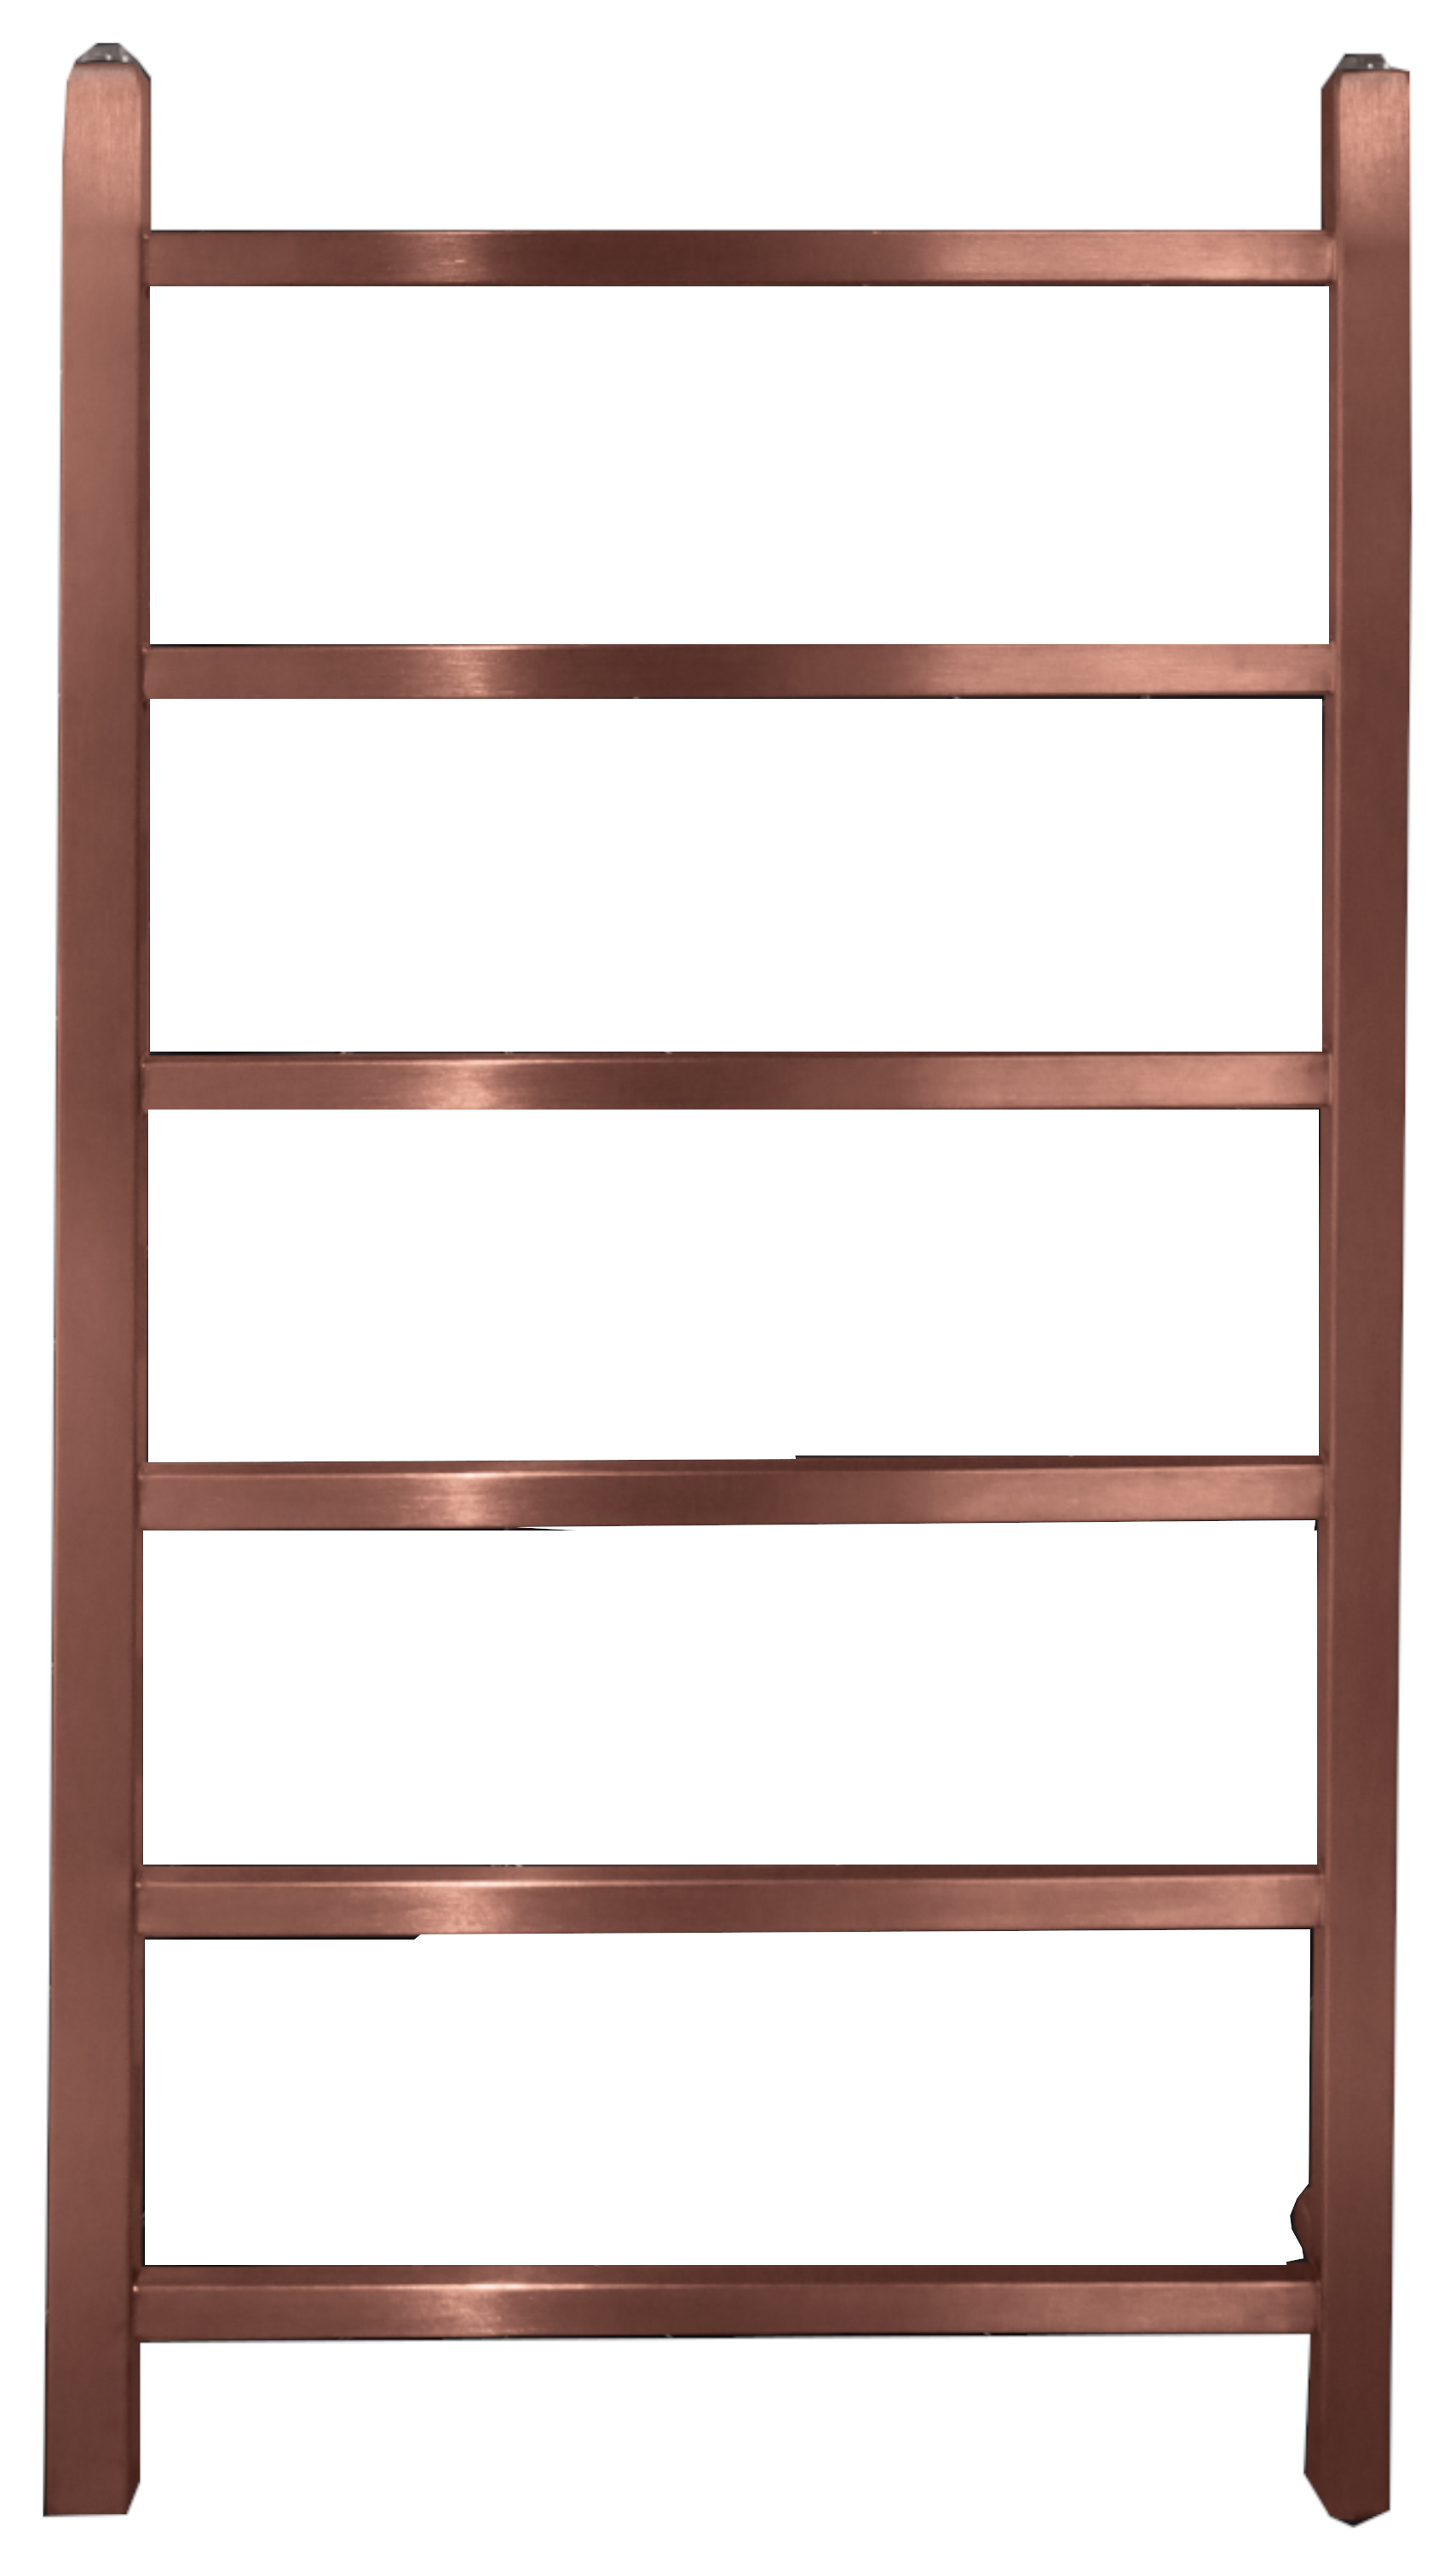 Image of Towelrads Diva Rose Gold Dry Electric Non Thermostatic Towel Radiator - 800 x 500mm